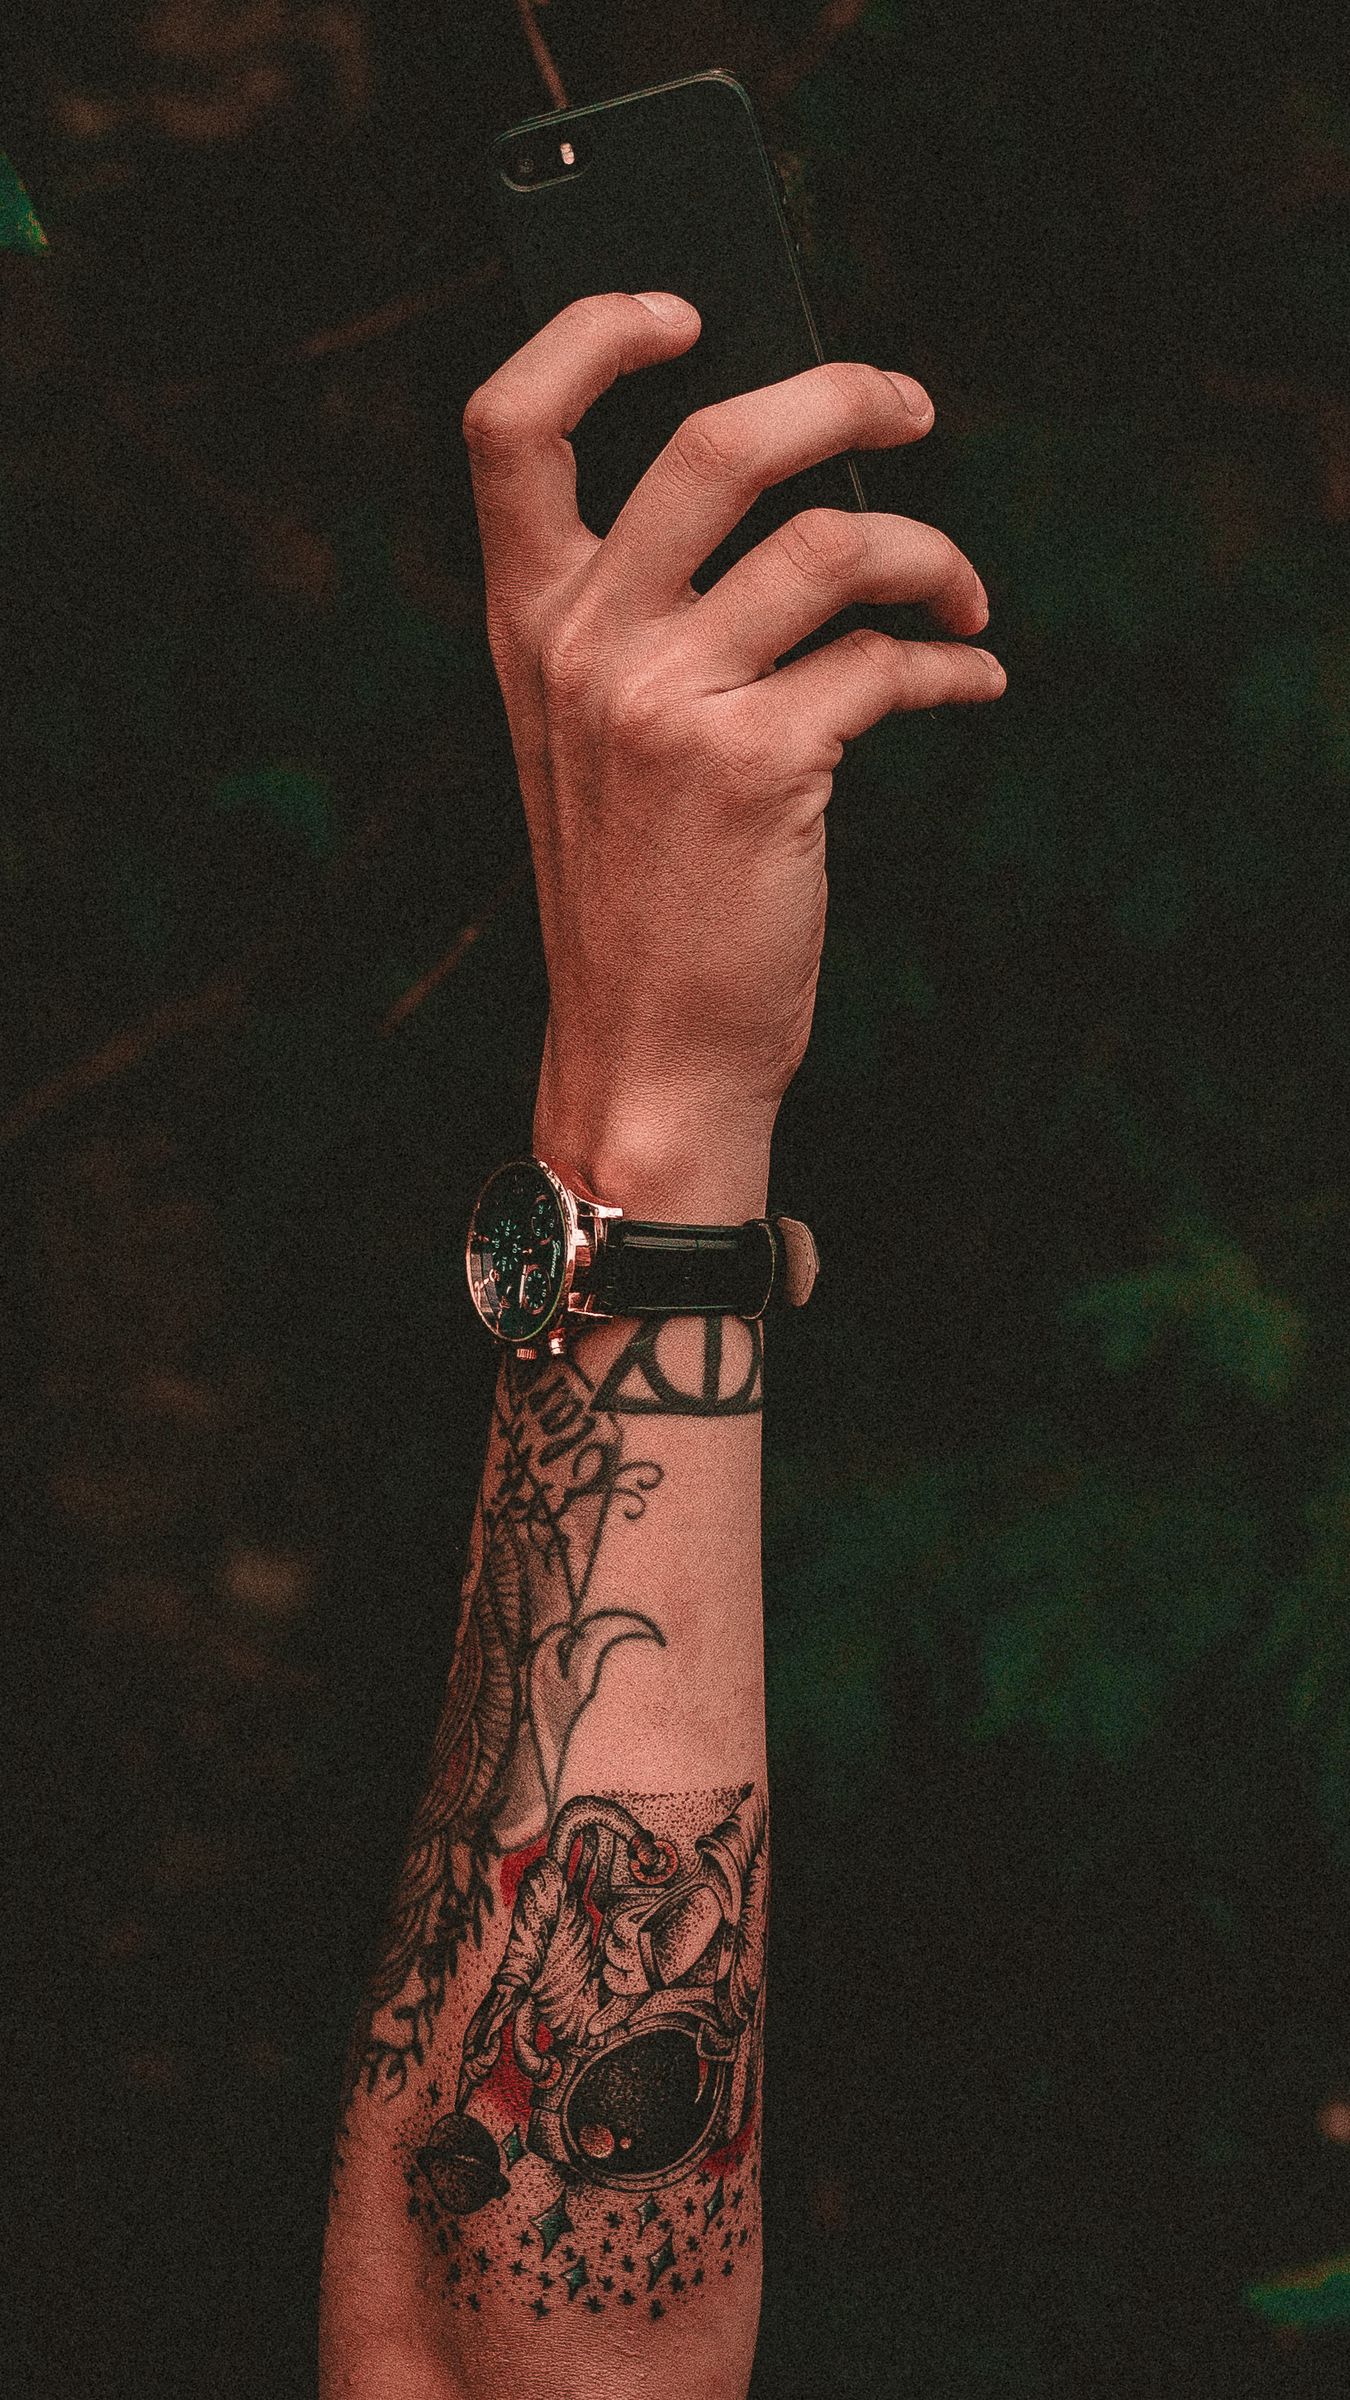 Download wallpaper 1350x2400 hand, tattoo, phone, watch iphone 8+/7+/6s+/6+  for parallax hd background